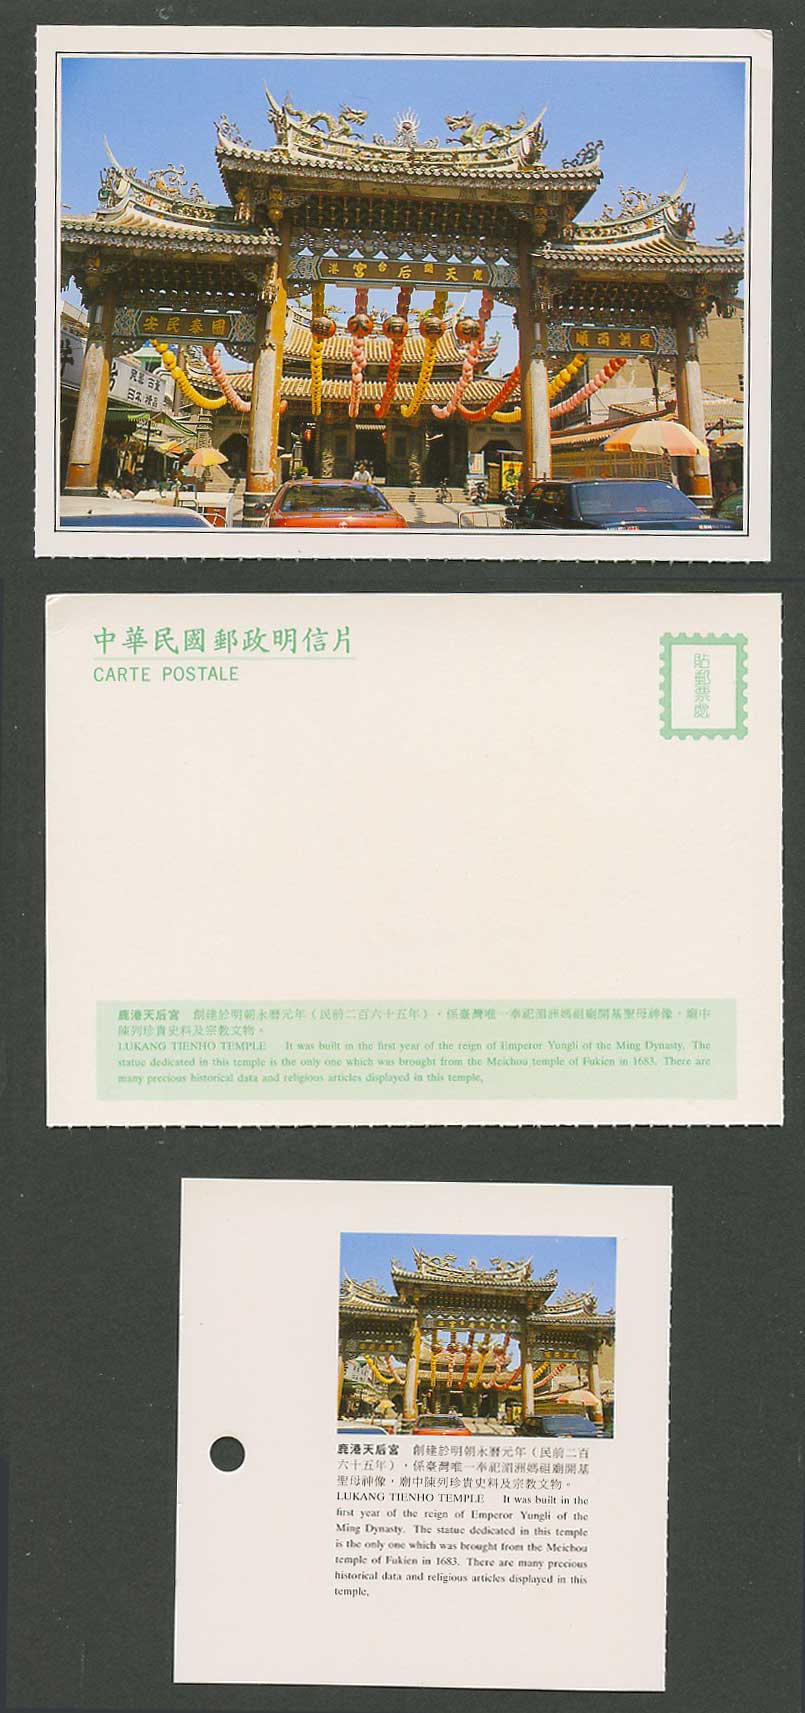 Taiwan Formosa China Postcard Lukang Tienho Temple, Built in Ming Dynasty 鹿港天后宮